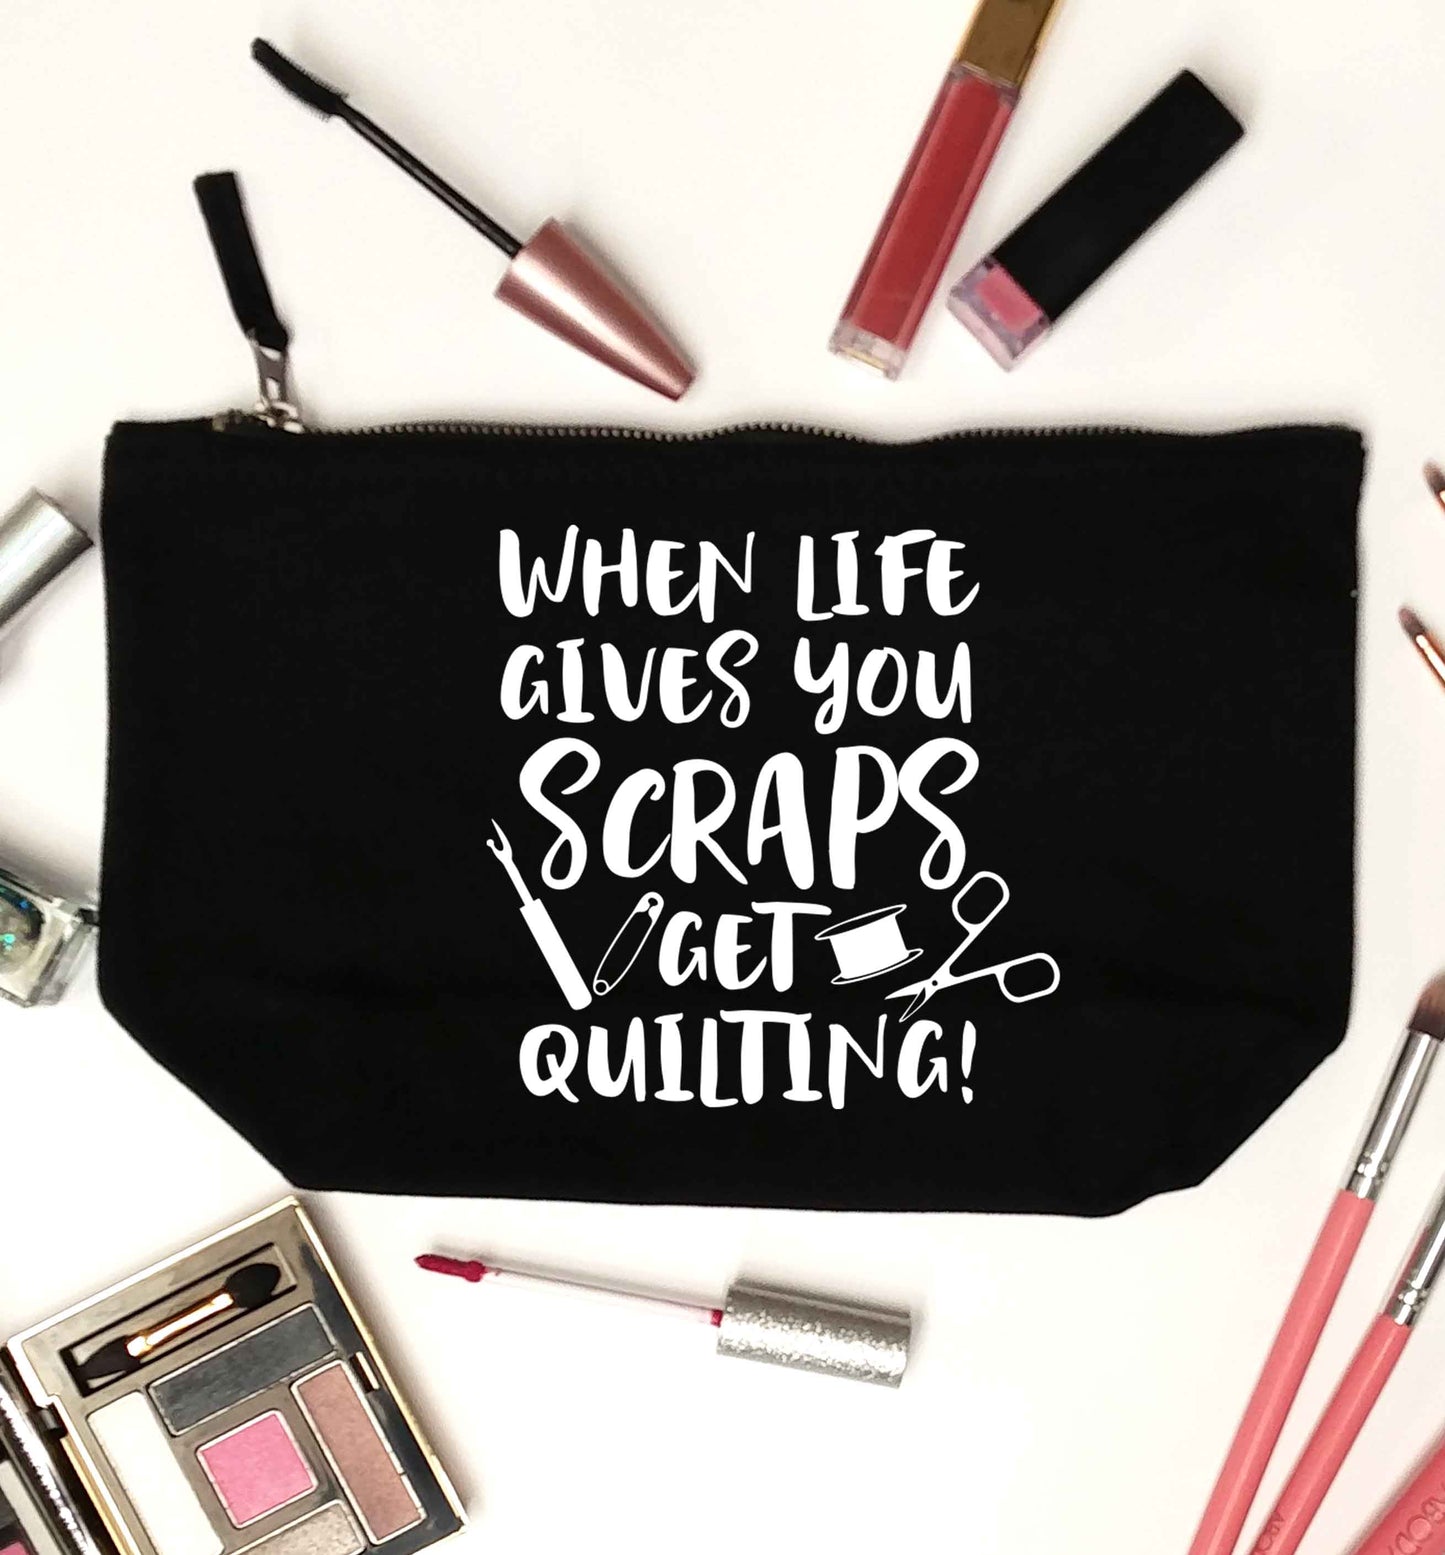 When life gives you scraps get quilting! black makeup bag